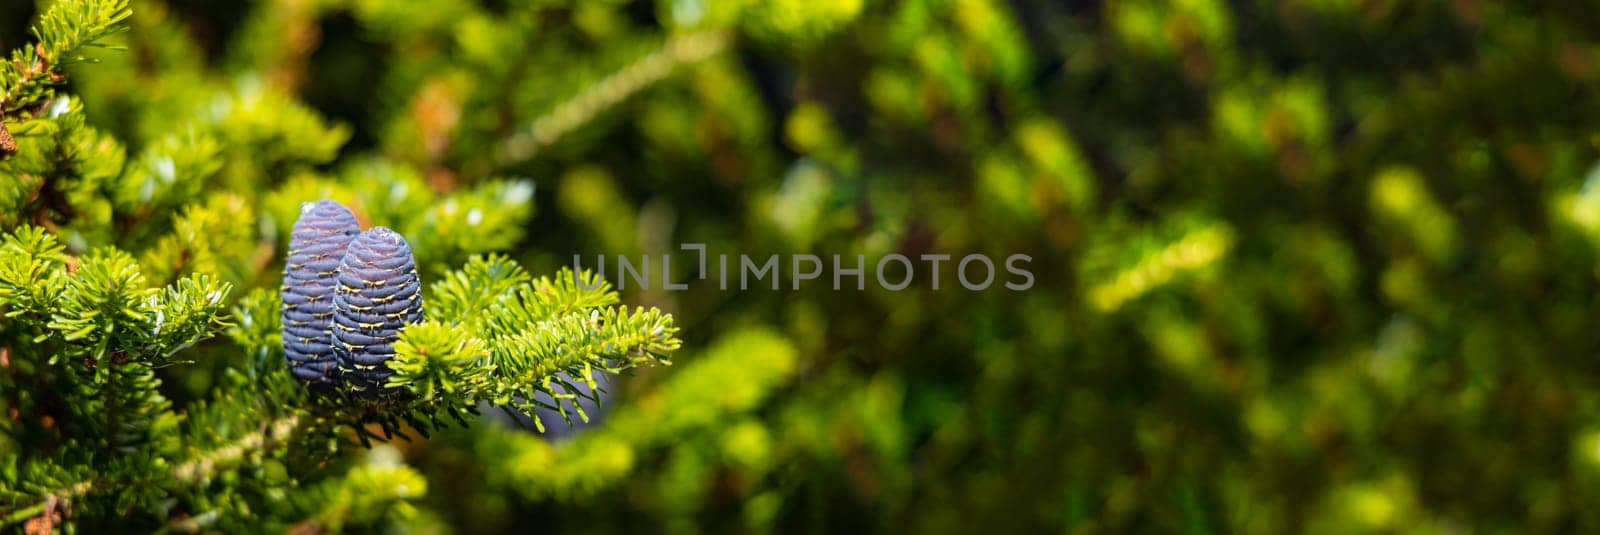 Small young blue cones growing upwards on Korean fir on a sunny day by Wierzchu